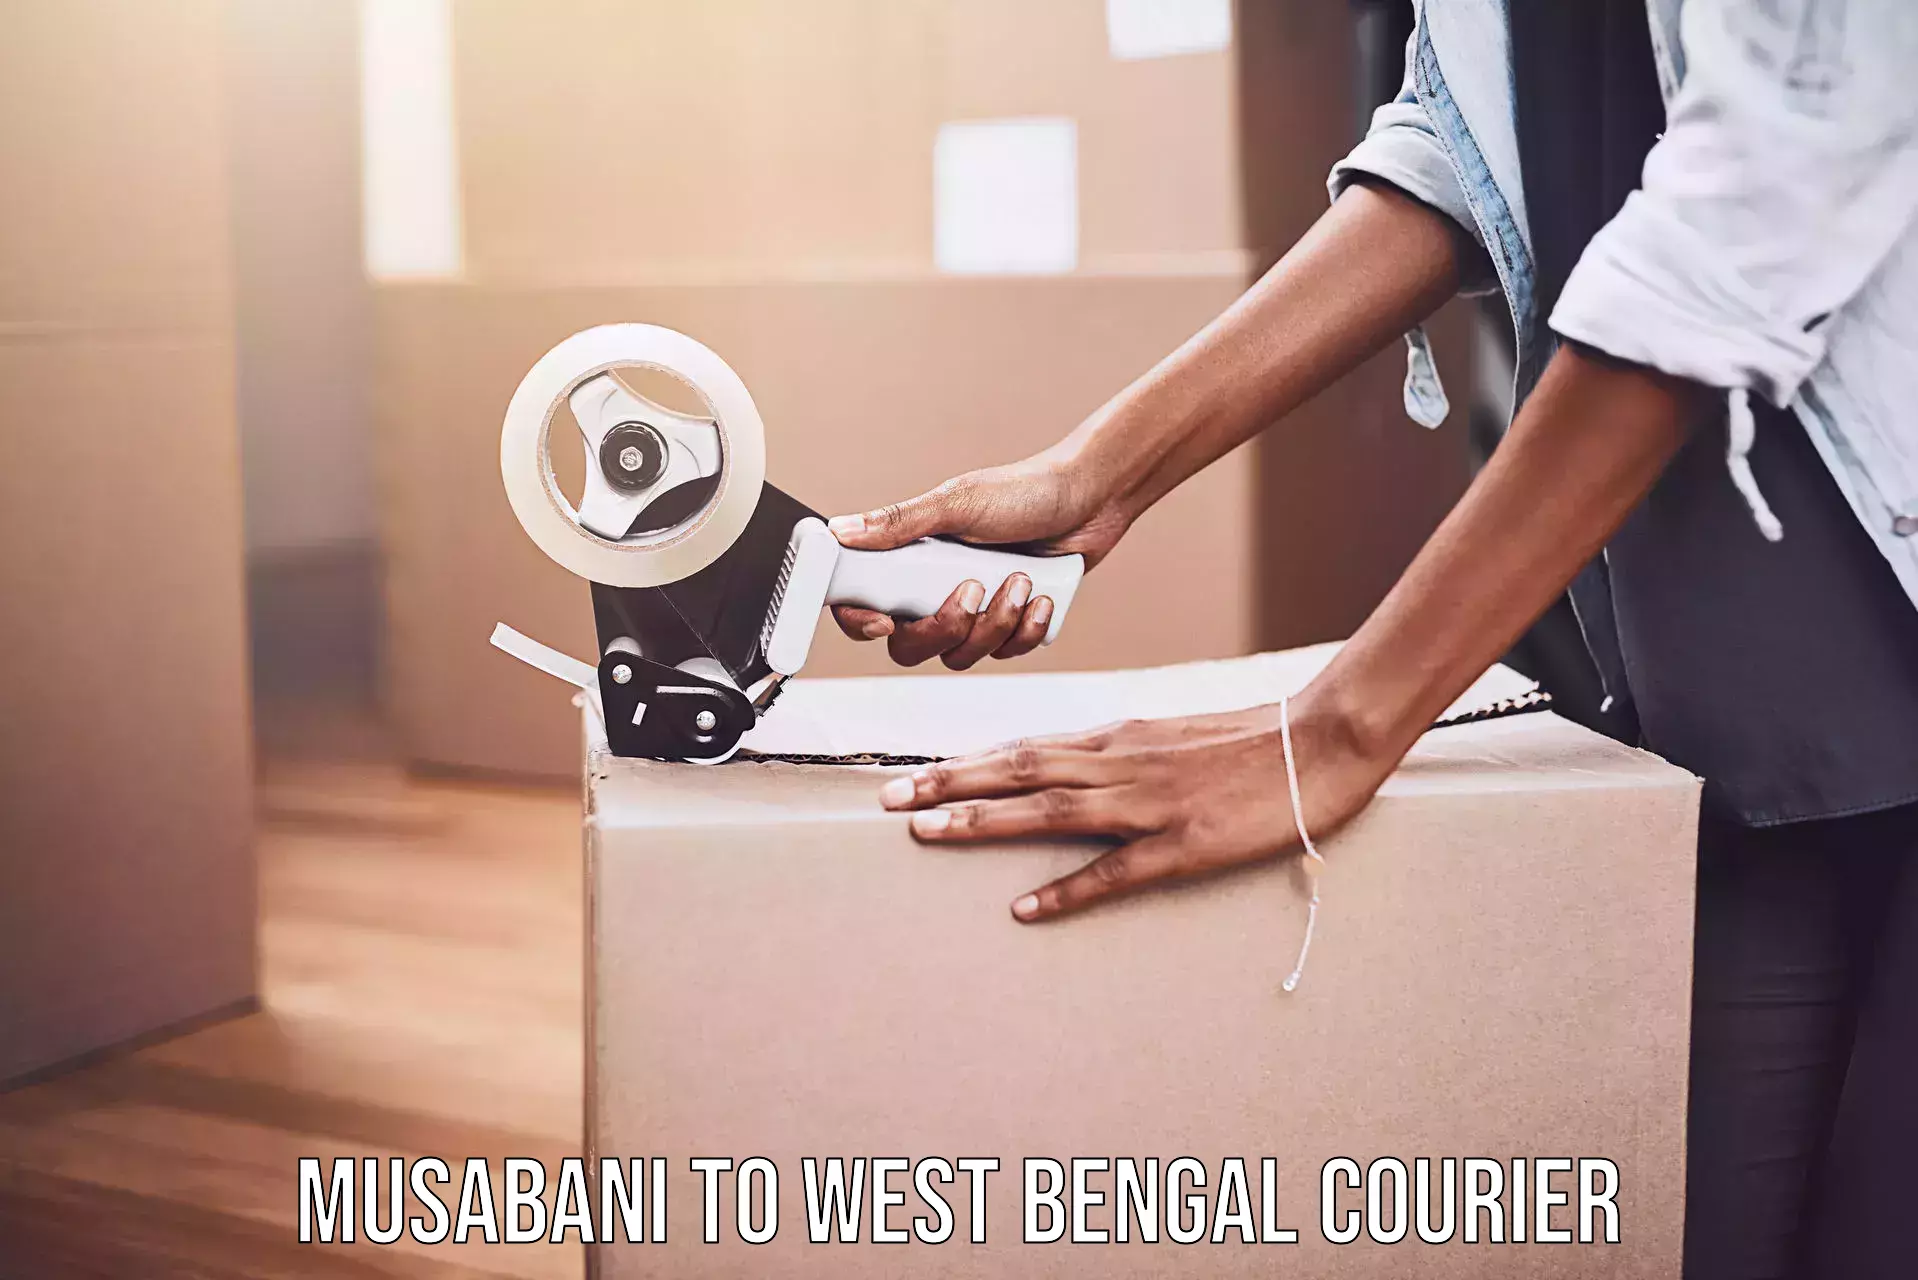 Courier service partnerships in Musabani to Hemtabad